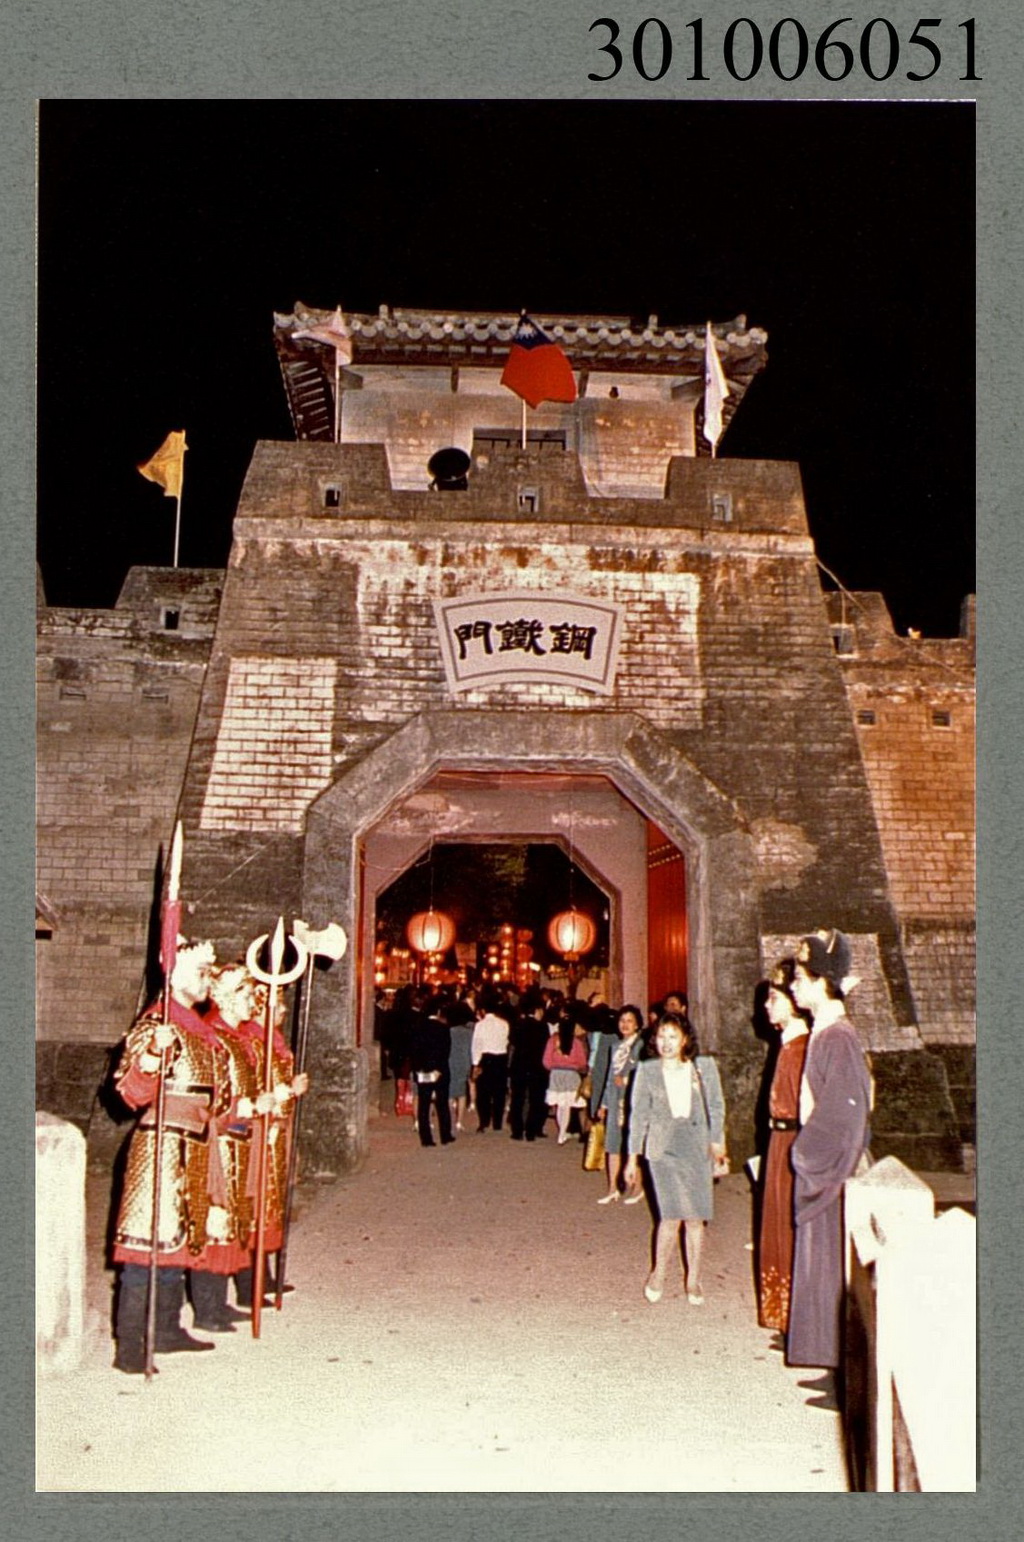 Welcoming at the steel gate. The 1988 International Steel Technologies Symposium.